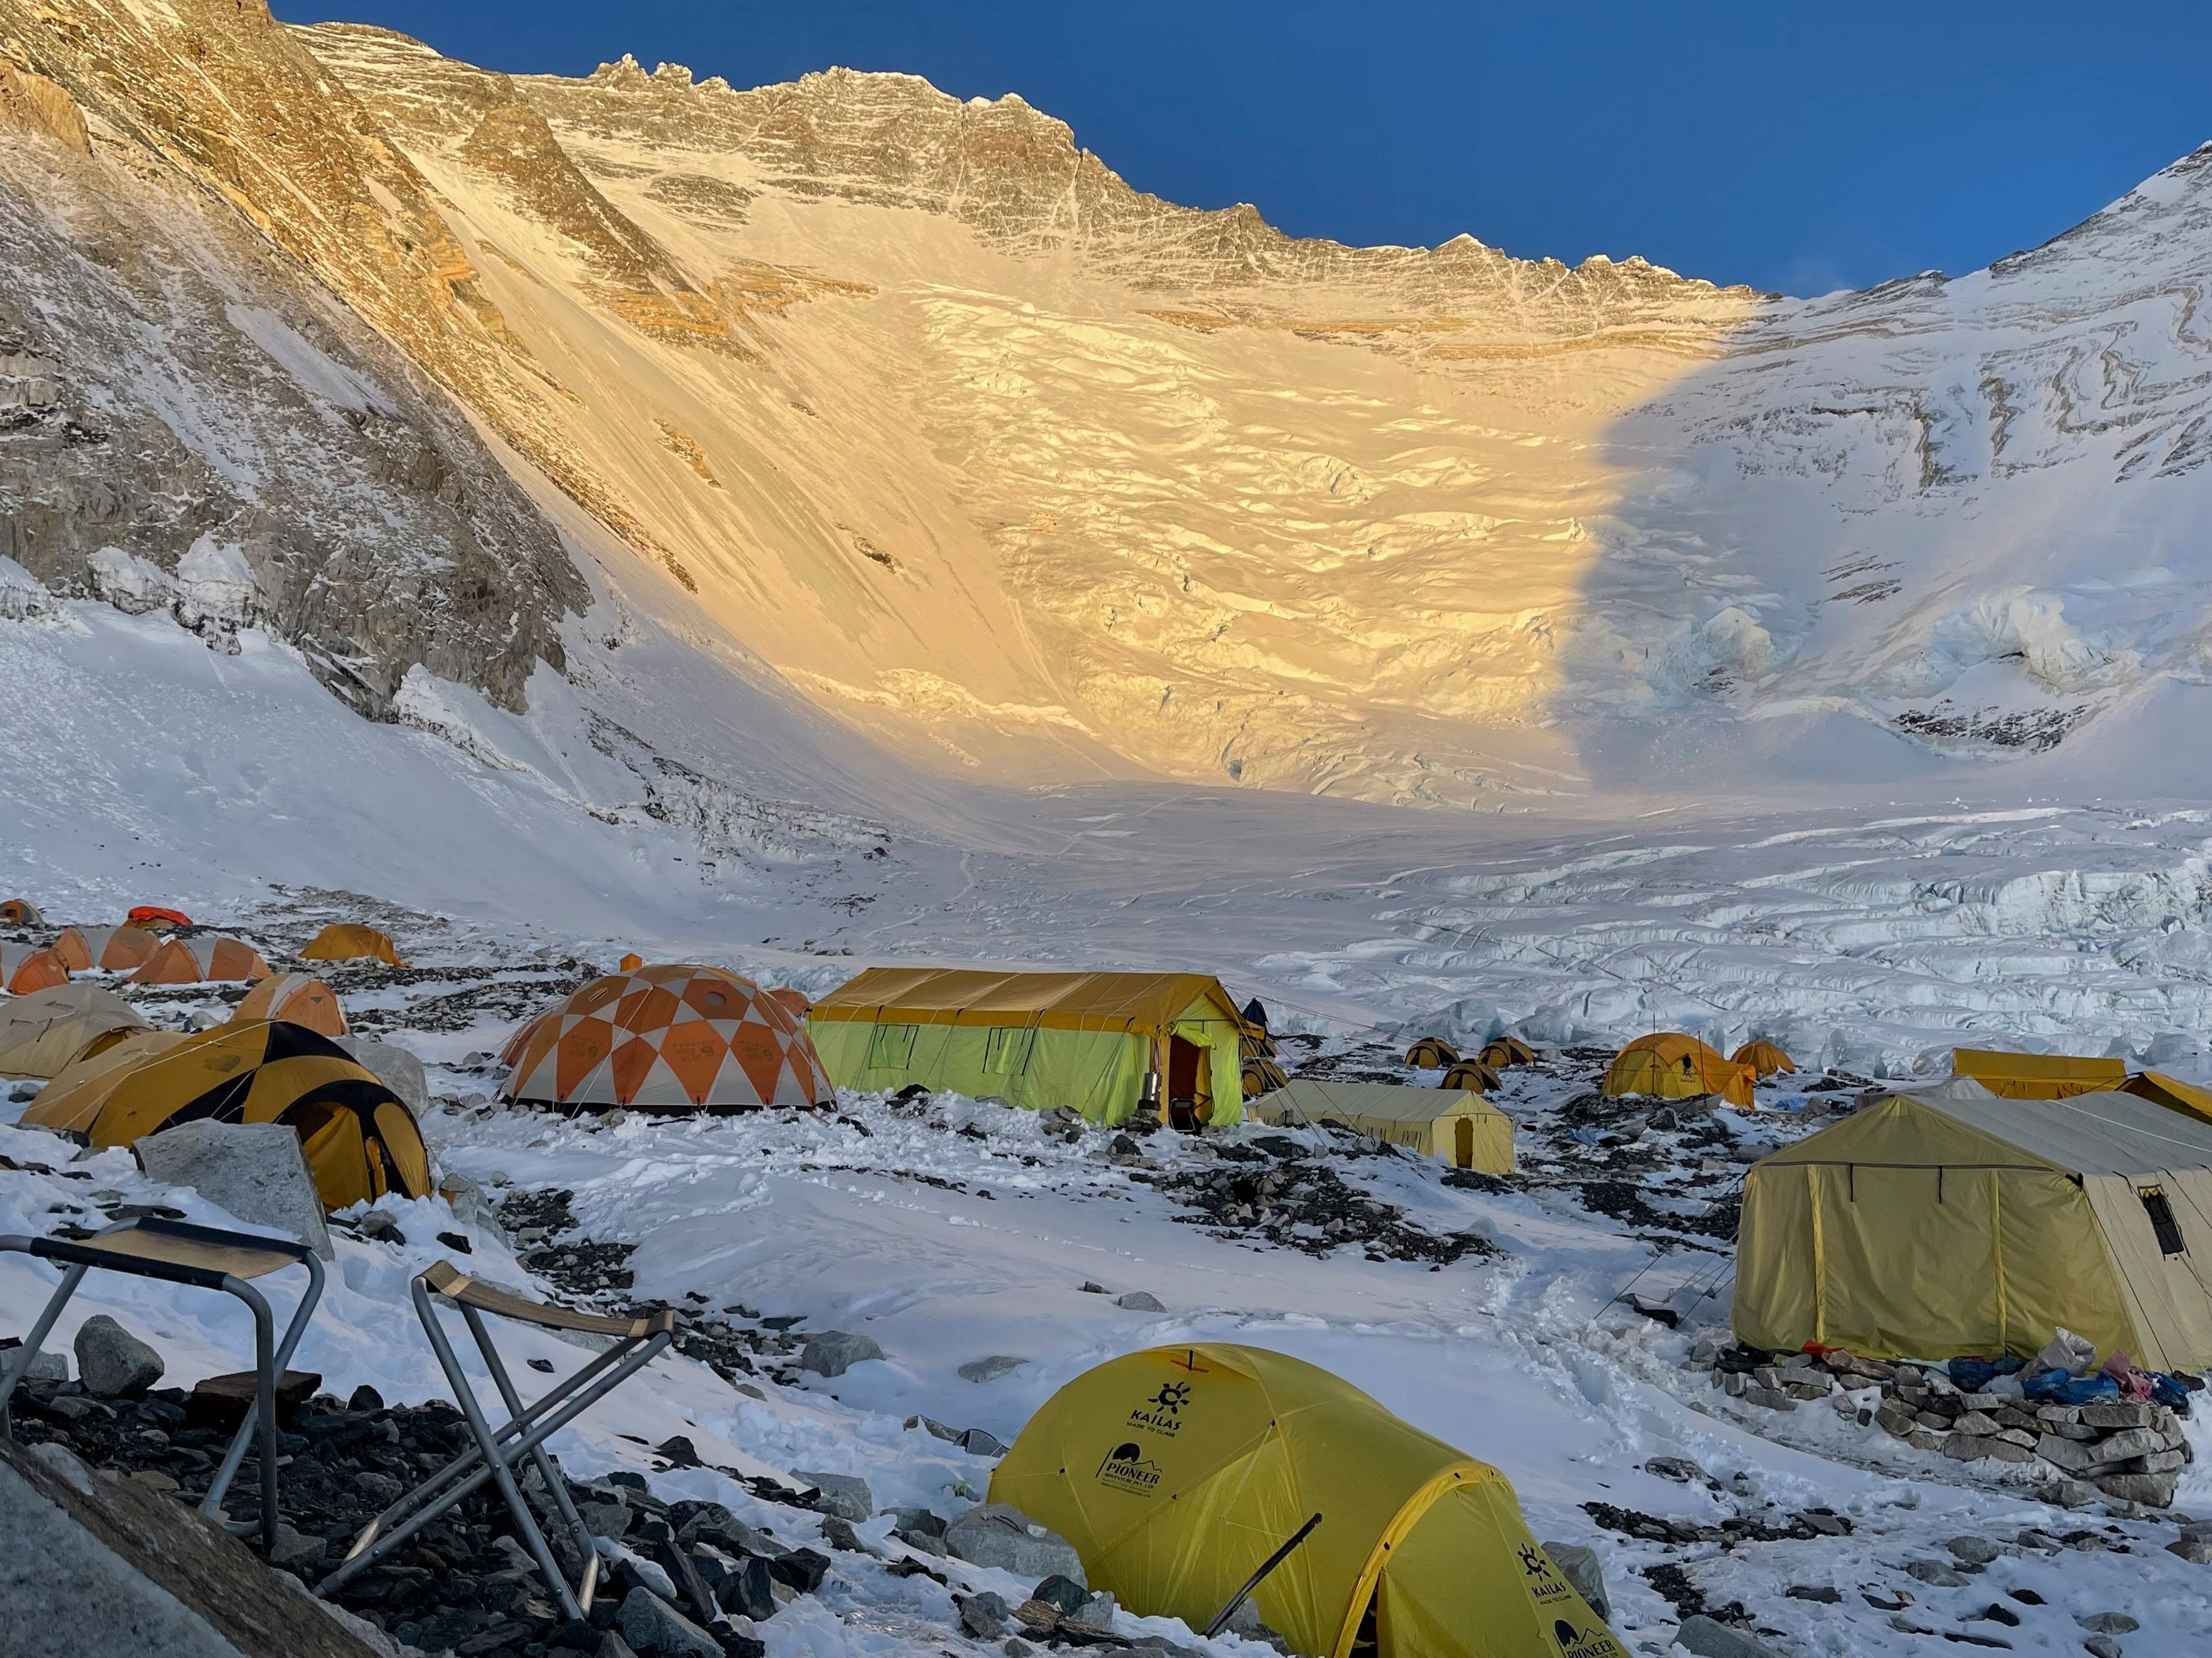 Mountaineers’ tents at Camp 2 of Mount Everest